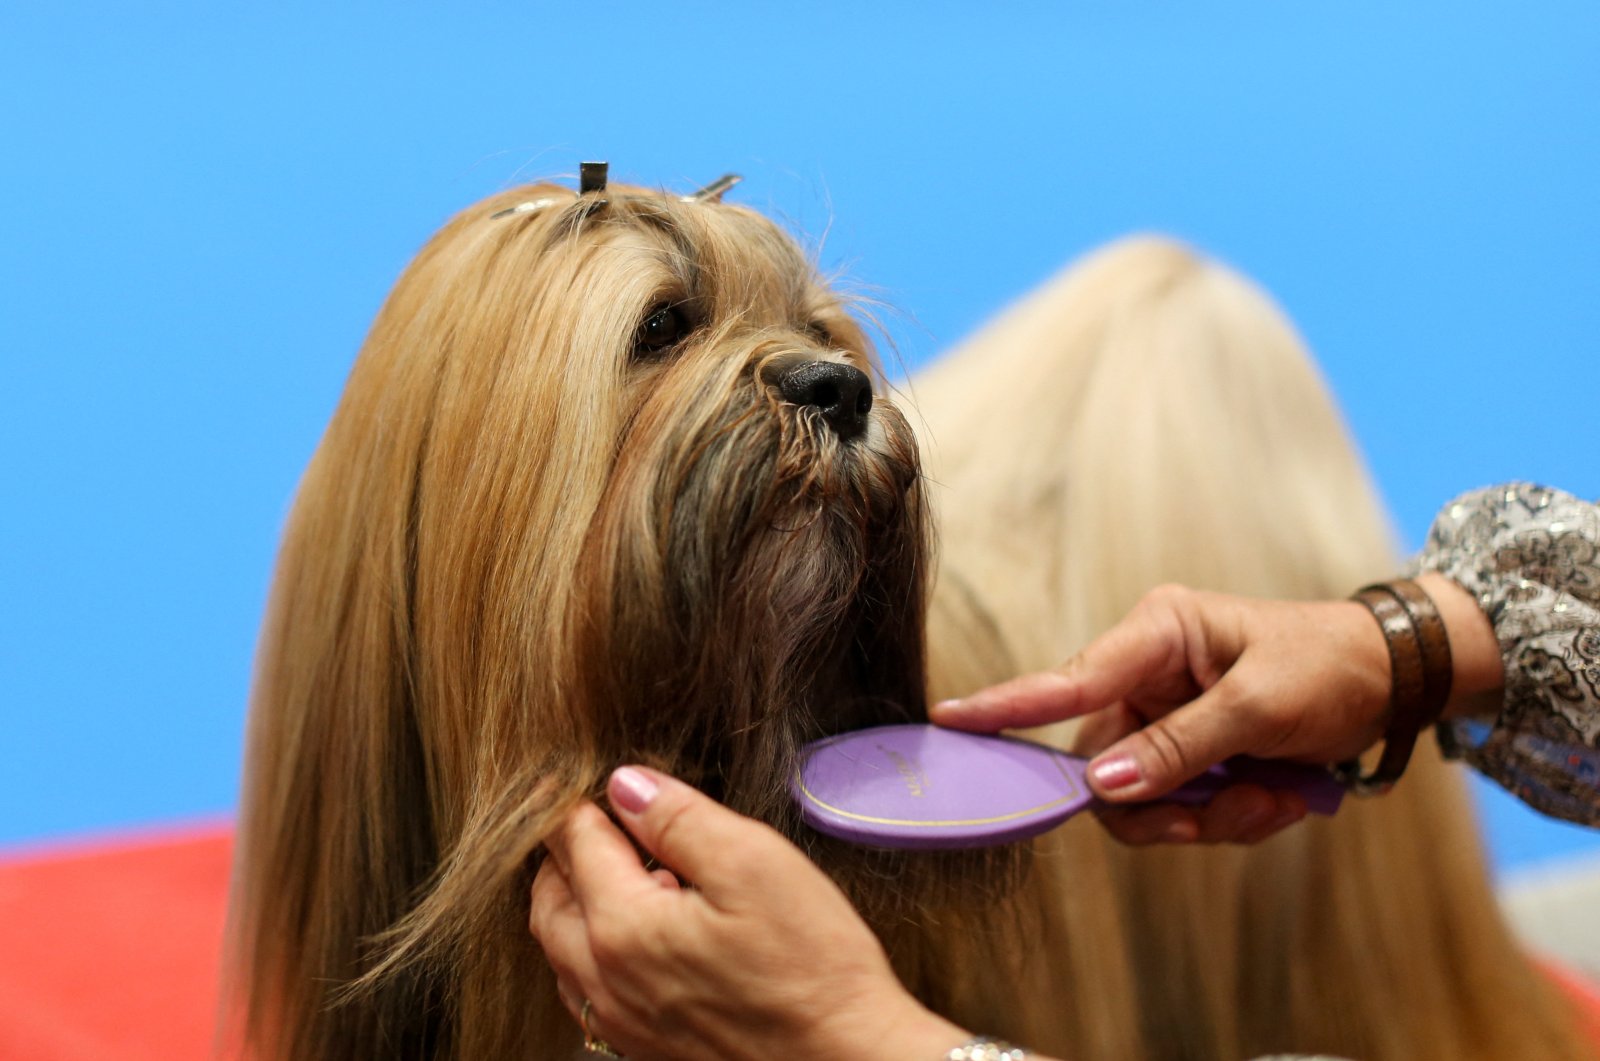 A woman grooms her Maltese at the 2022 World Dog Show, where more than 15,000 dogs from all around the globe are expected to attend, at the IFEMA conference center in Madrid, Spain, June 23, 2022. (Reuters Photo)